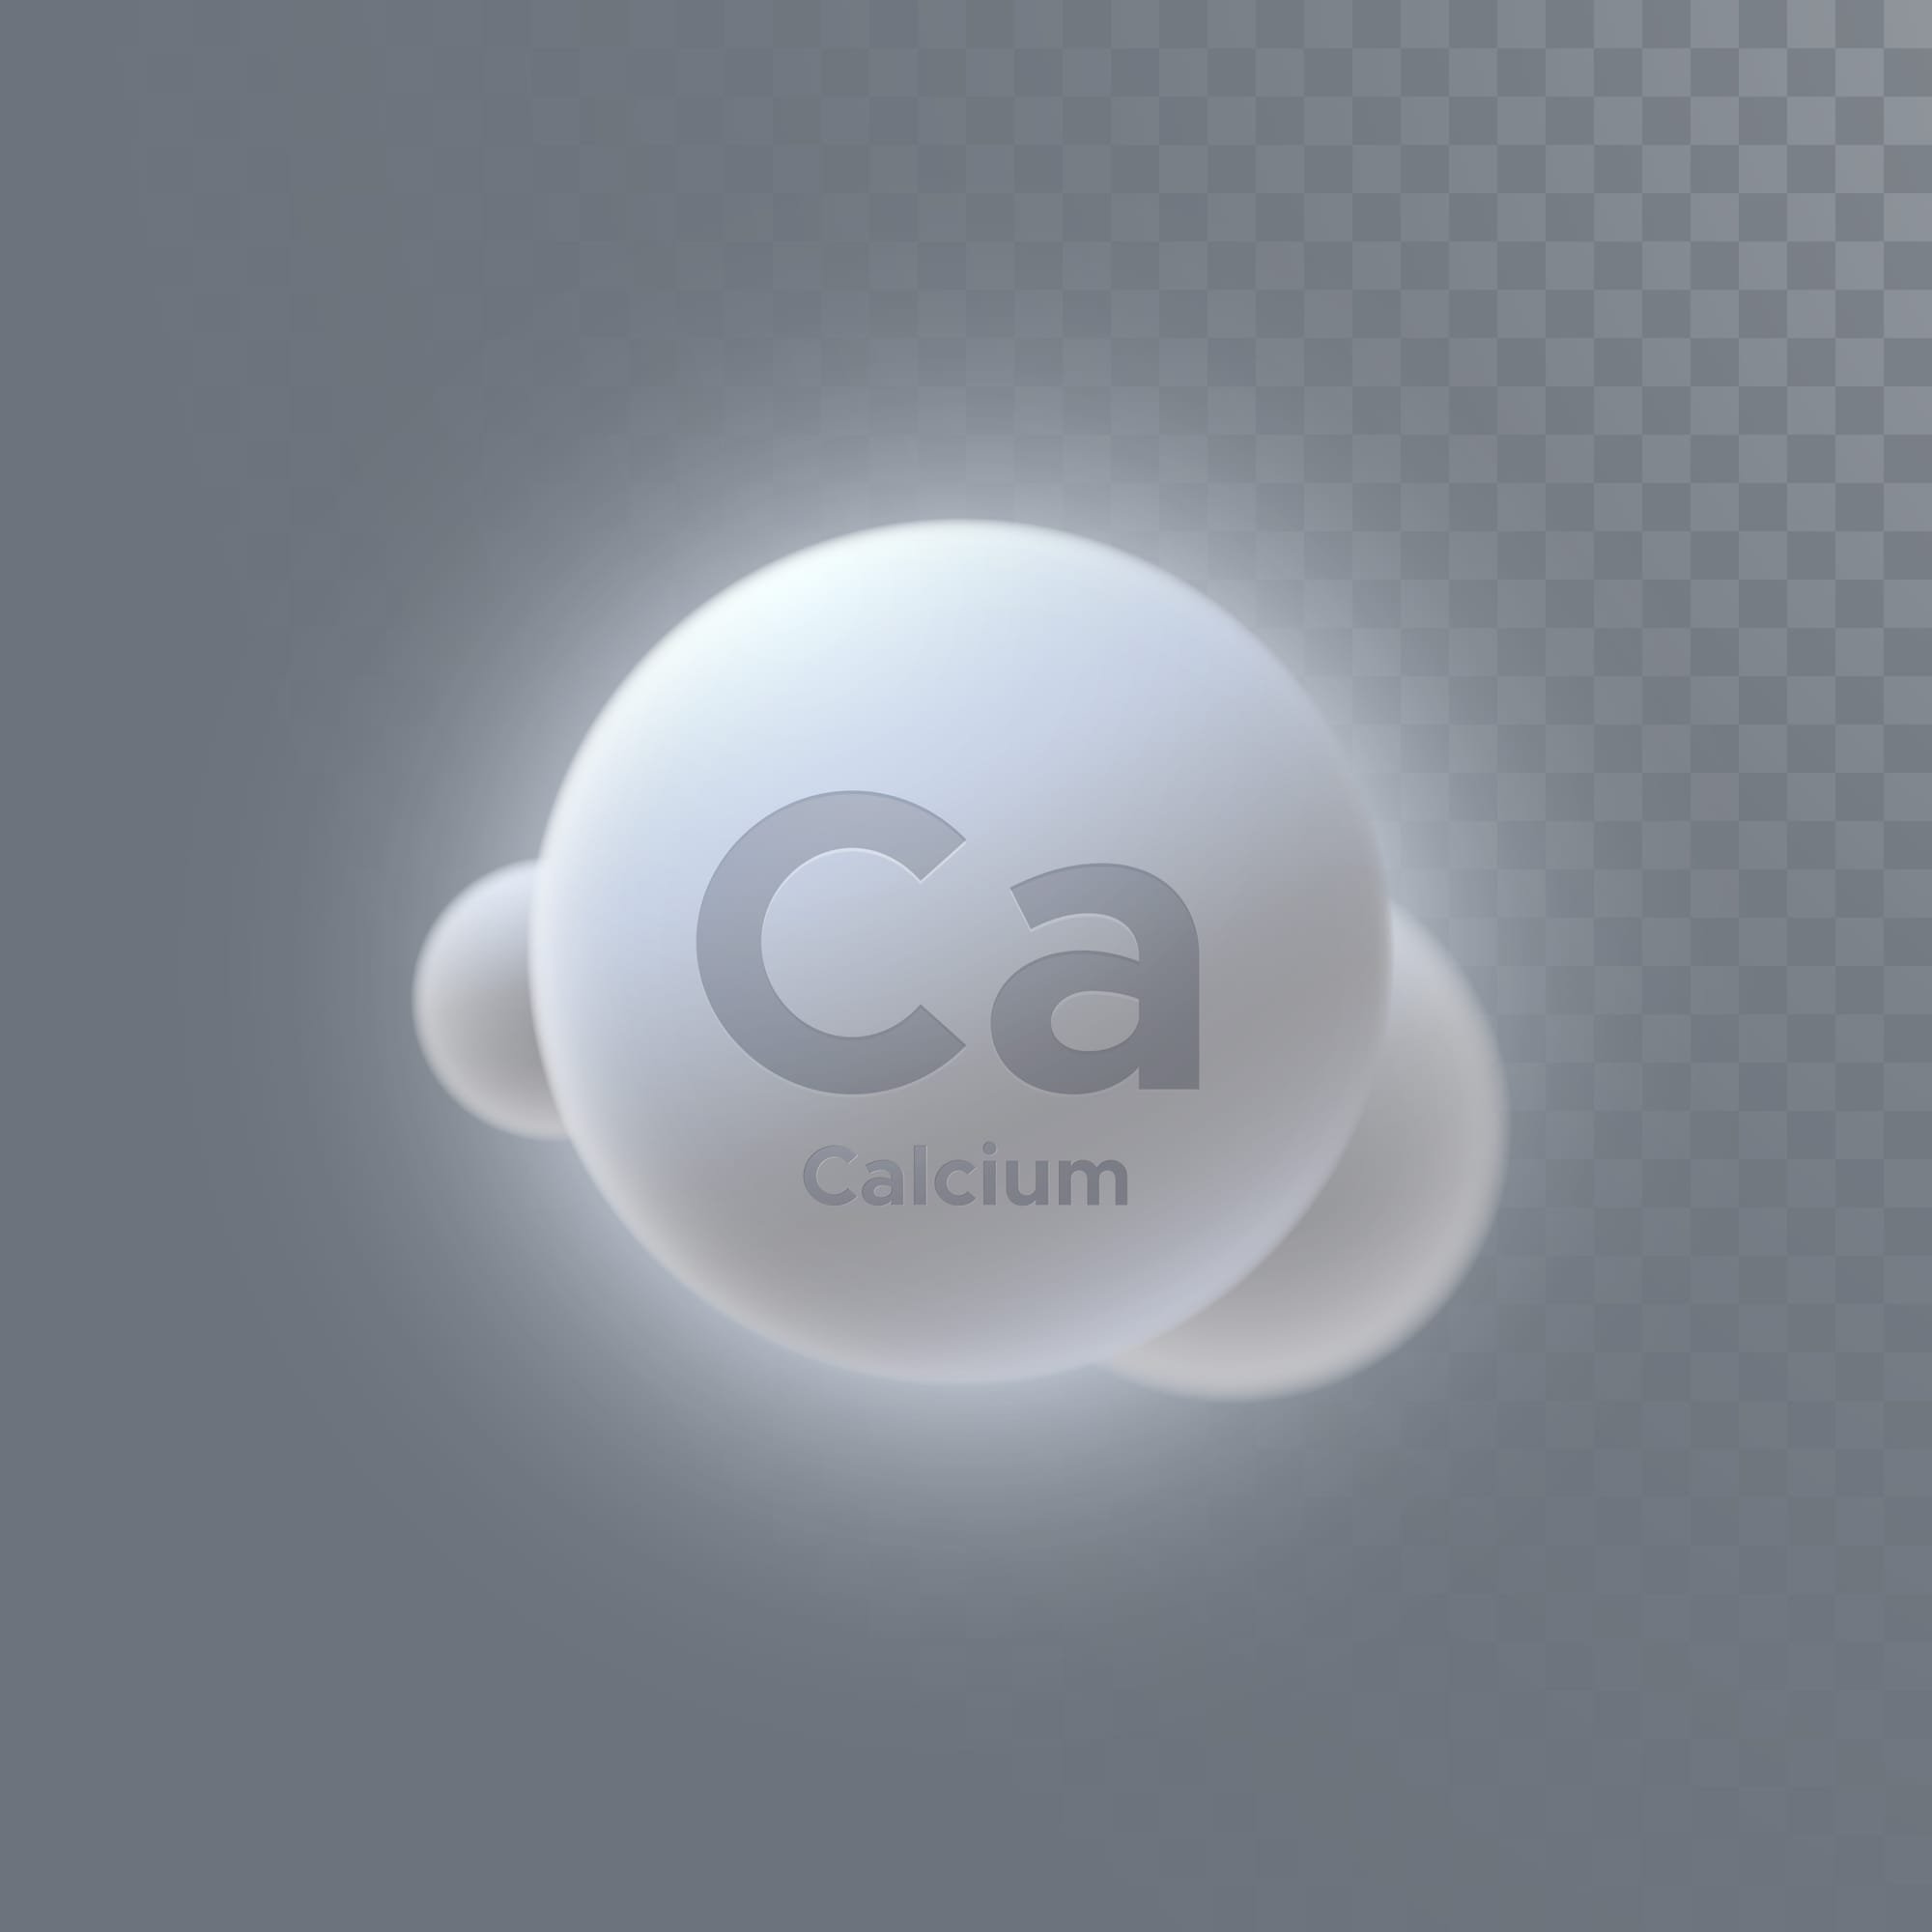 What Are the Side Effects of Wampole Calcium?